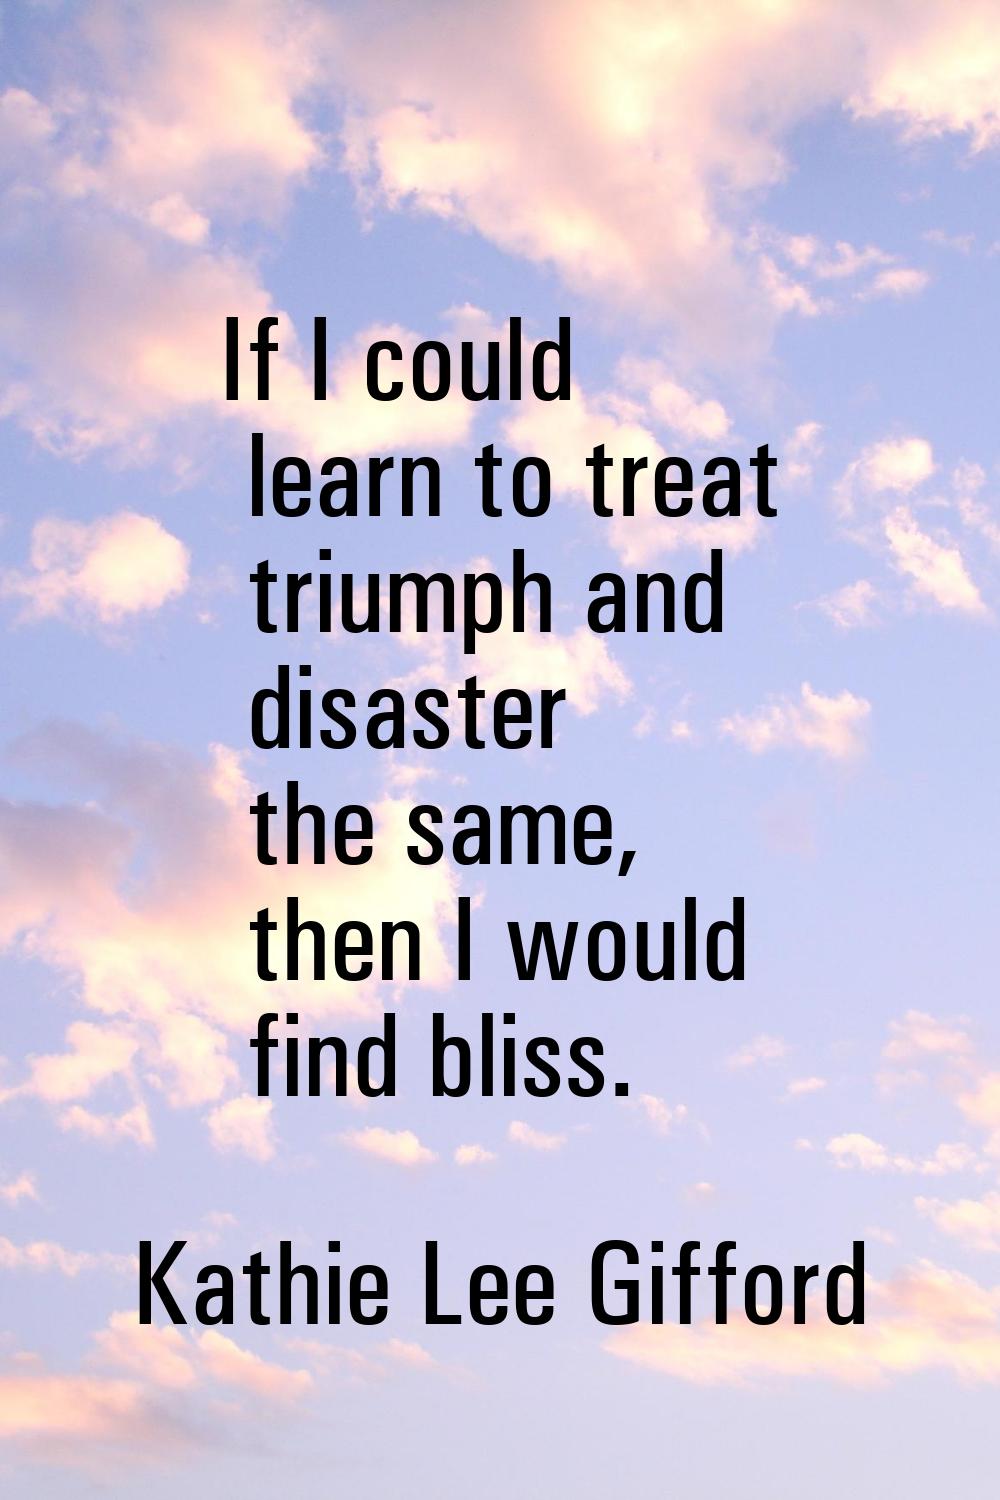 If I could learn to treat triumph and disaster the same, then I would find bliss.